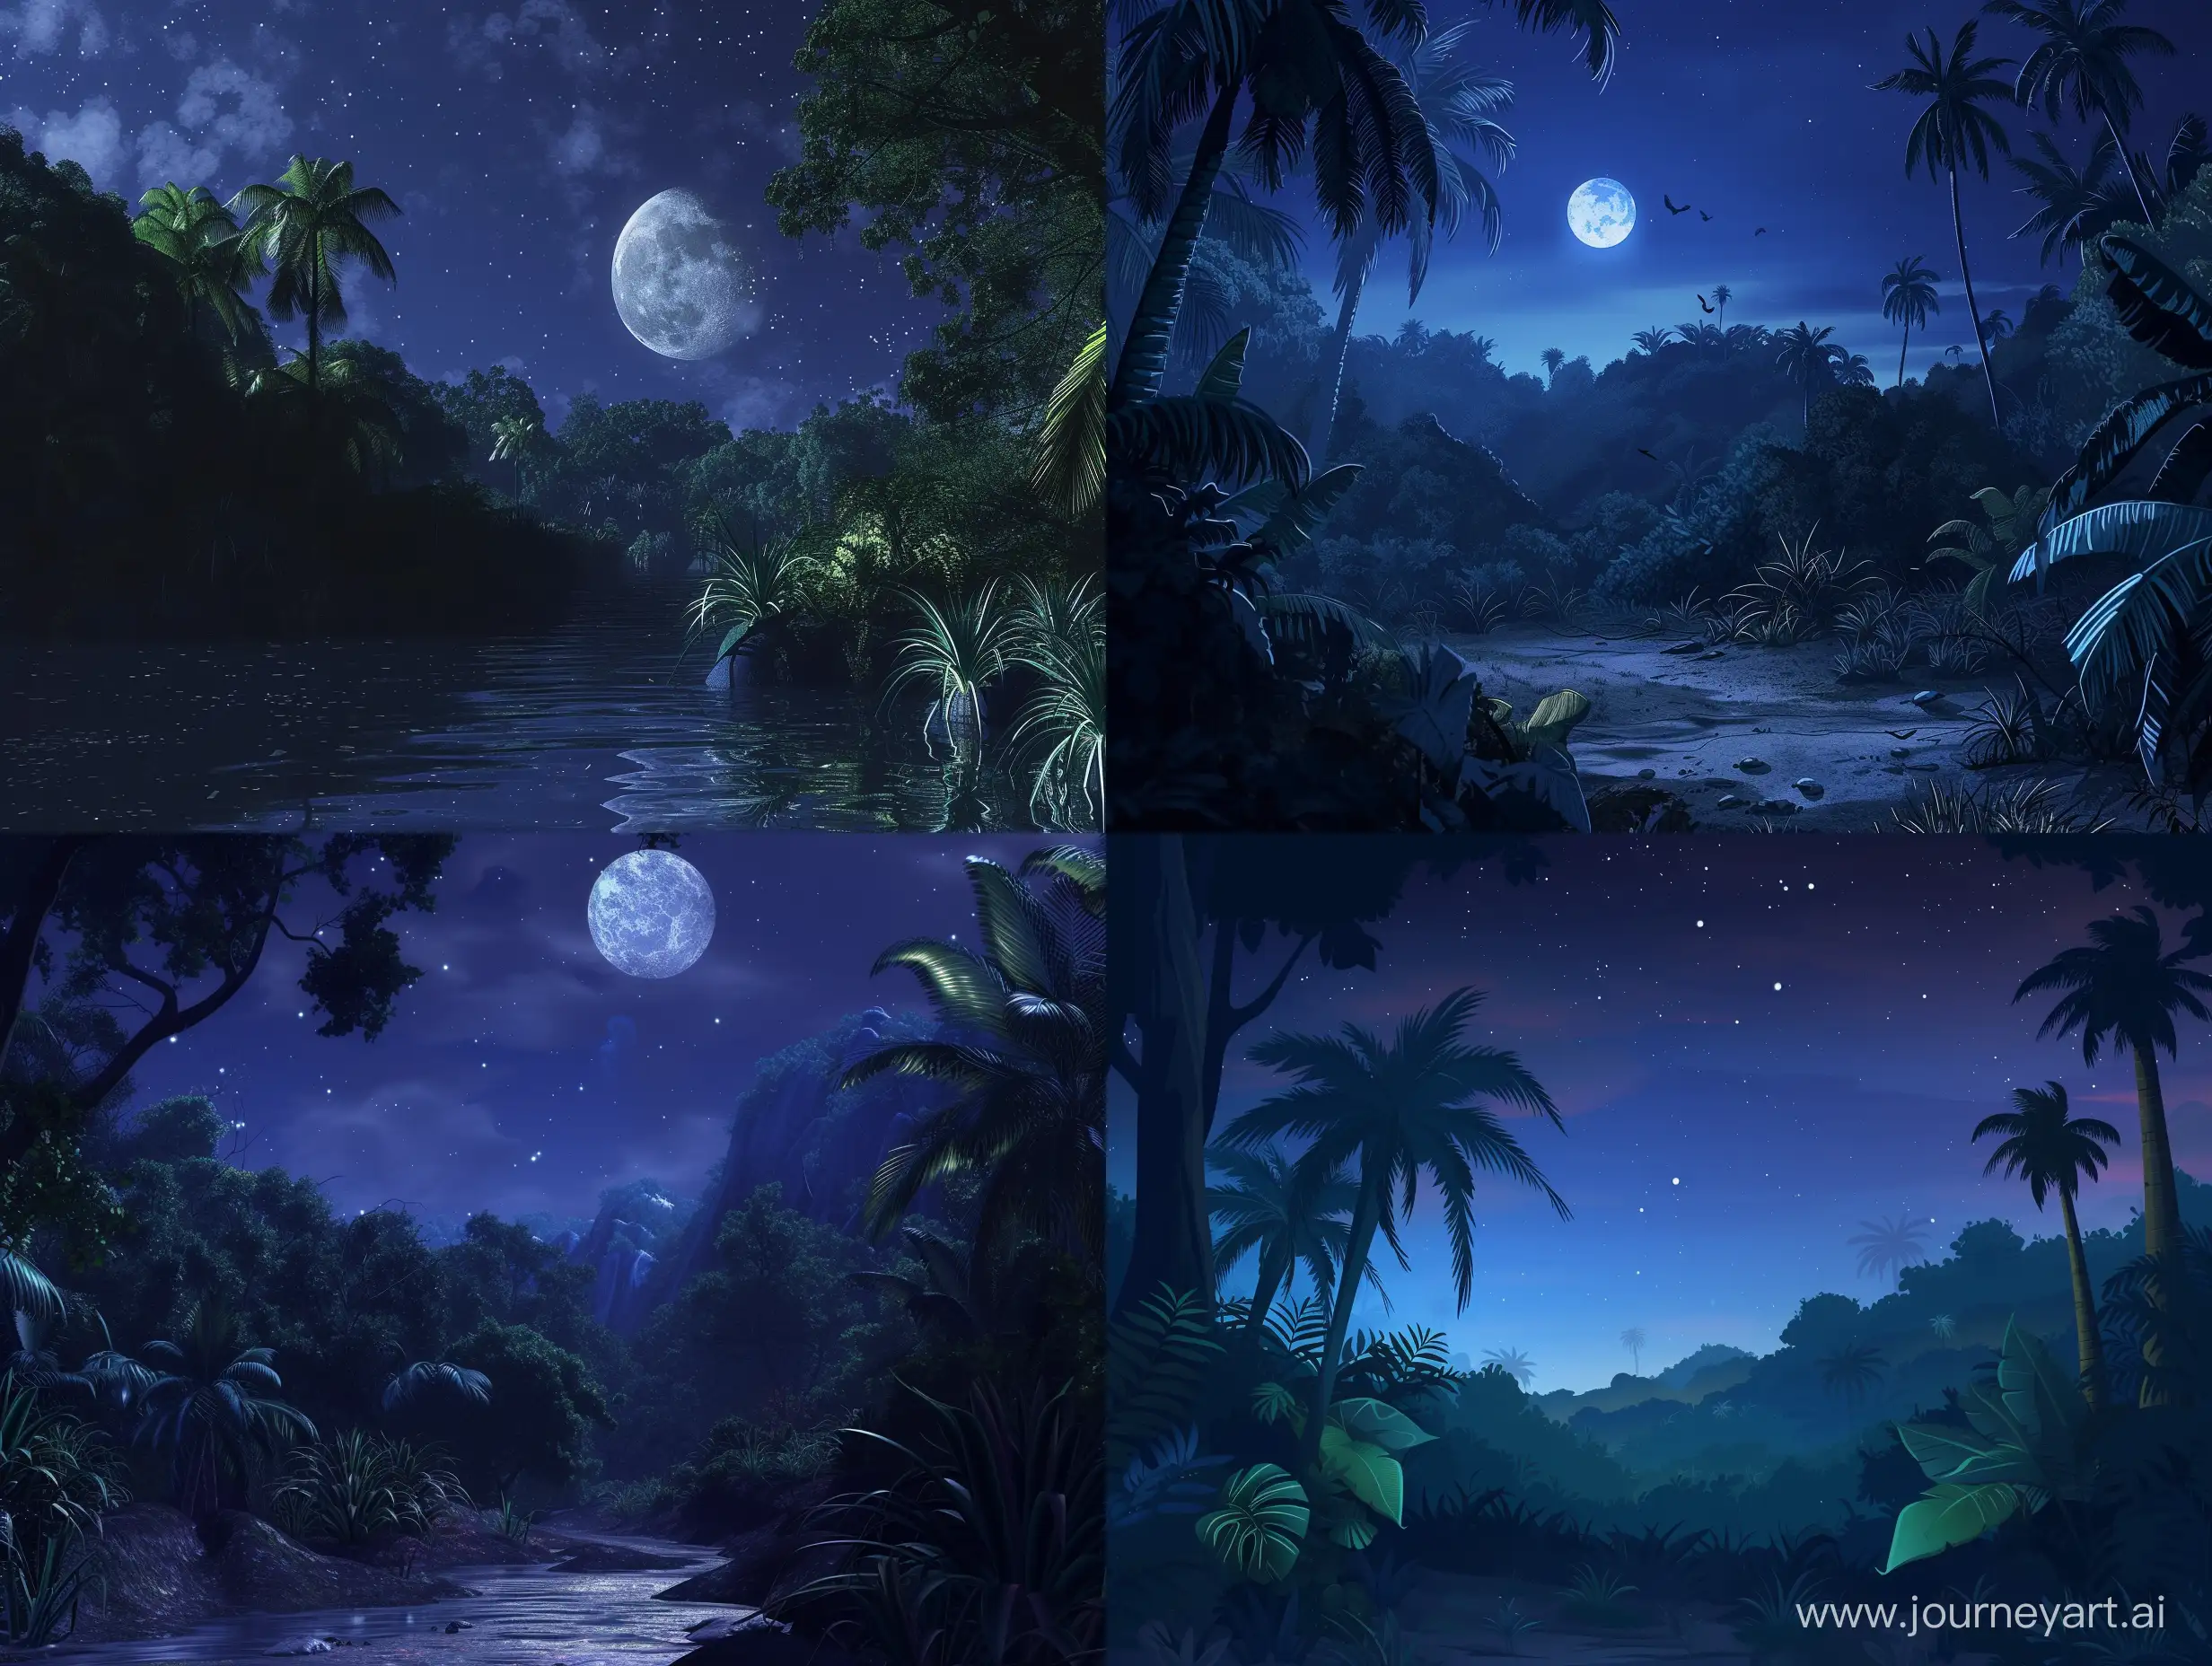 Night time scene on a jungle planet